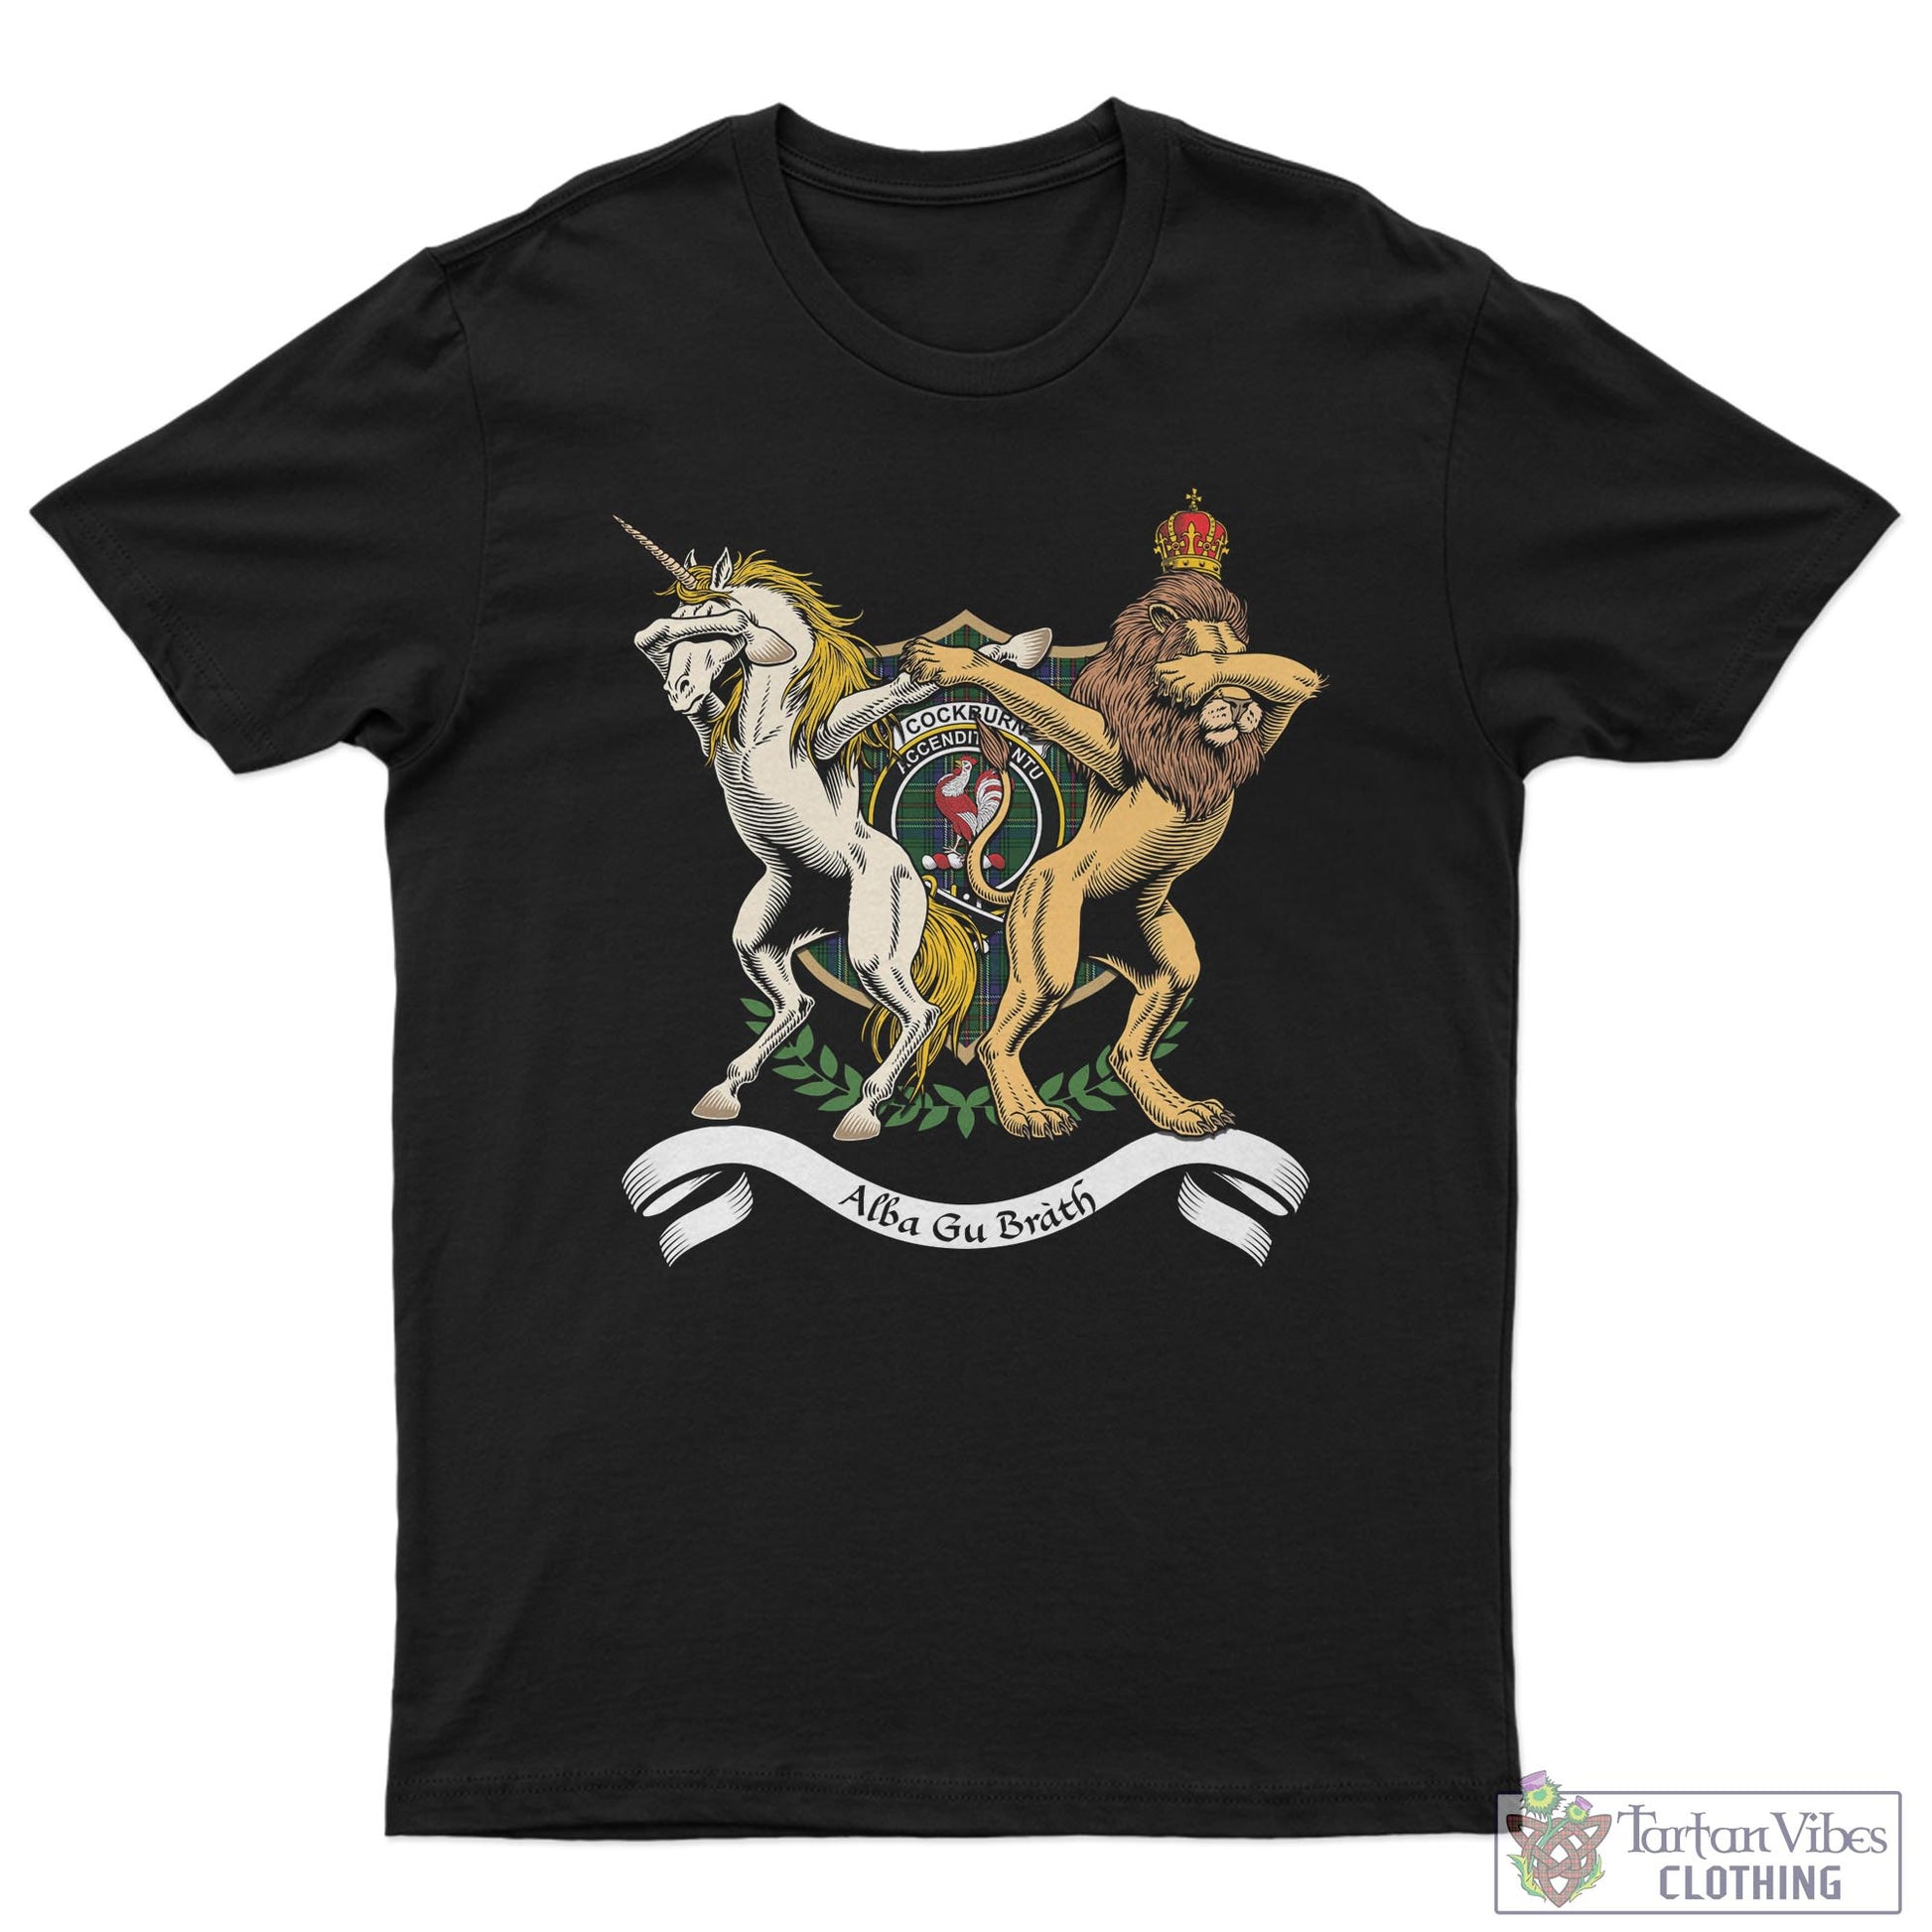 Tartan Vibes Clothing Cockburn Family Crest Cotton Men's T-Shirt with Scotland Royal Coat Of Arm Funny Style